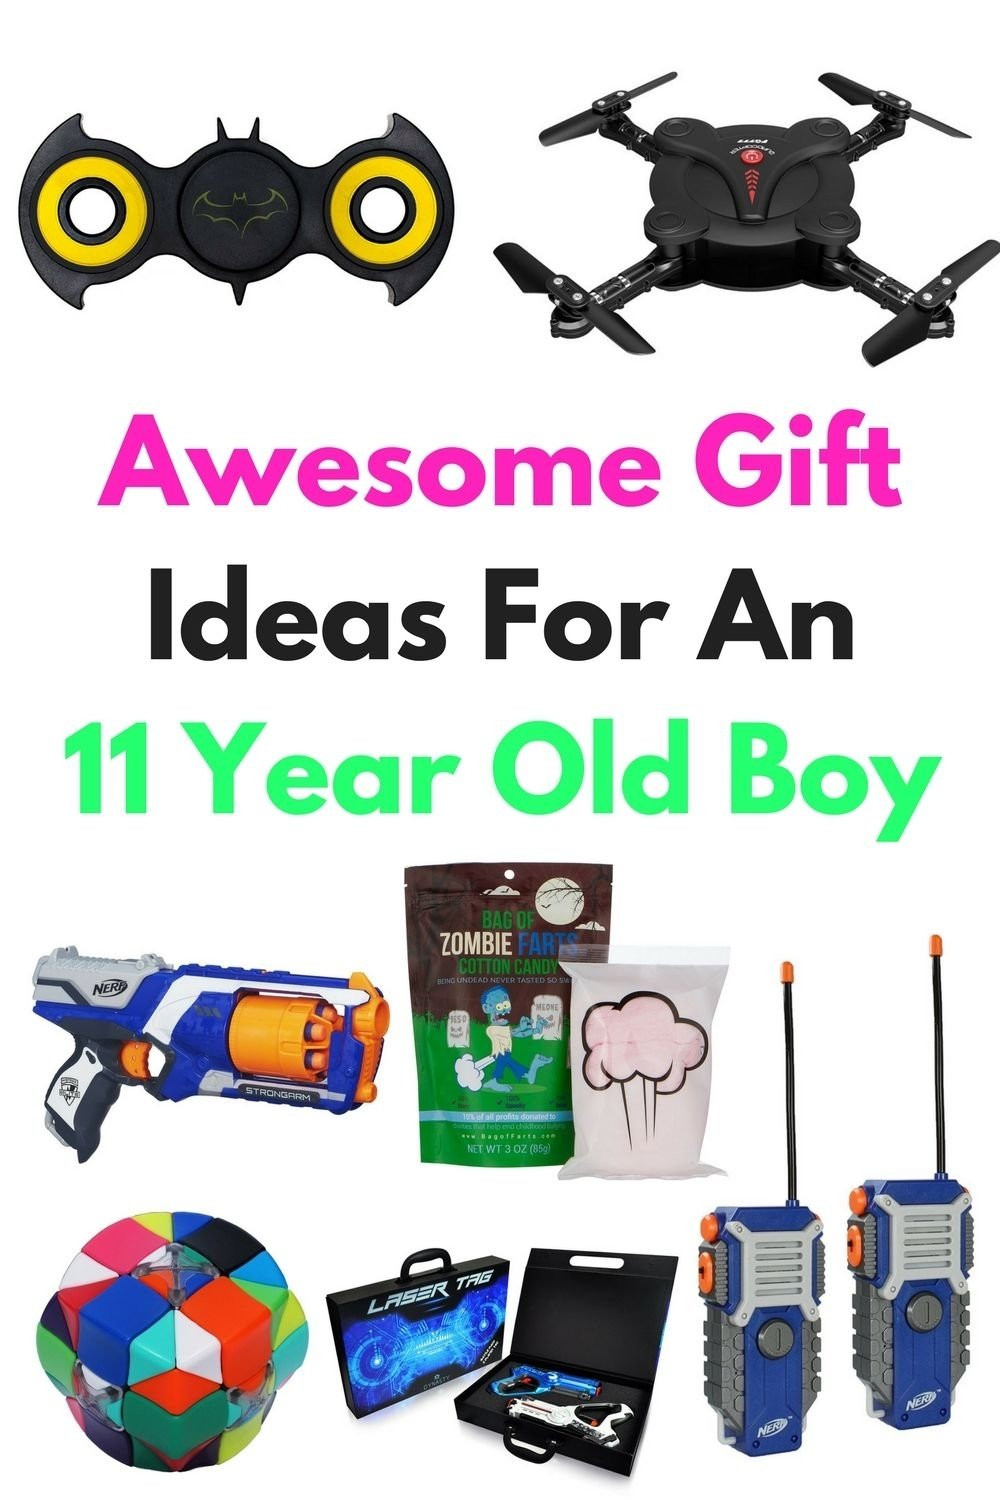 Gift Ideas For Boys 12
 10 Attractive 12 Year Old Boy Christmas Gift Ideas 2020